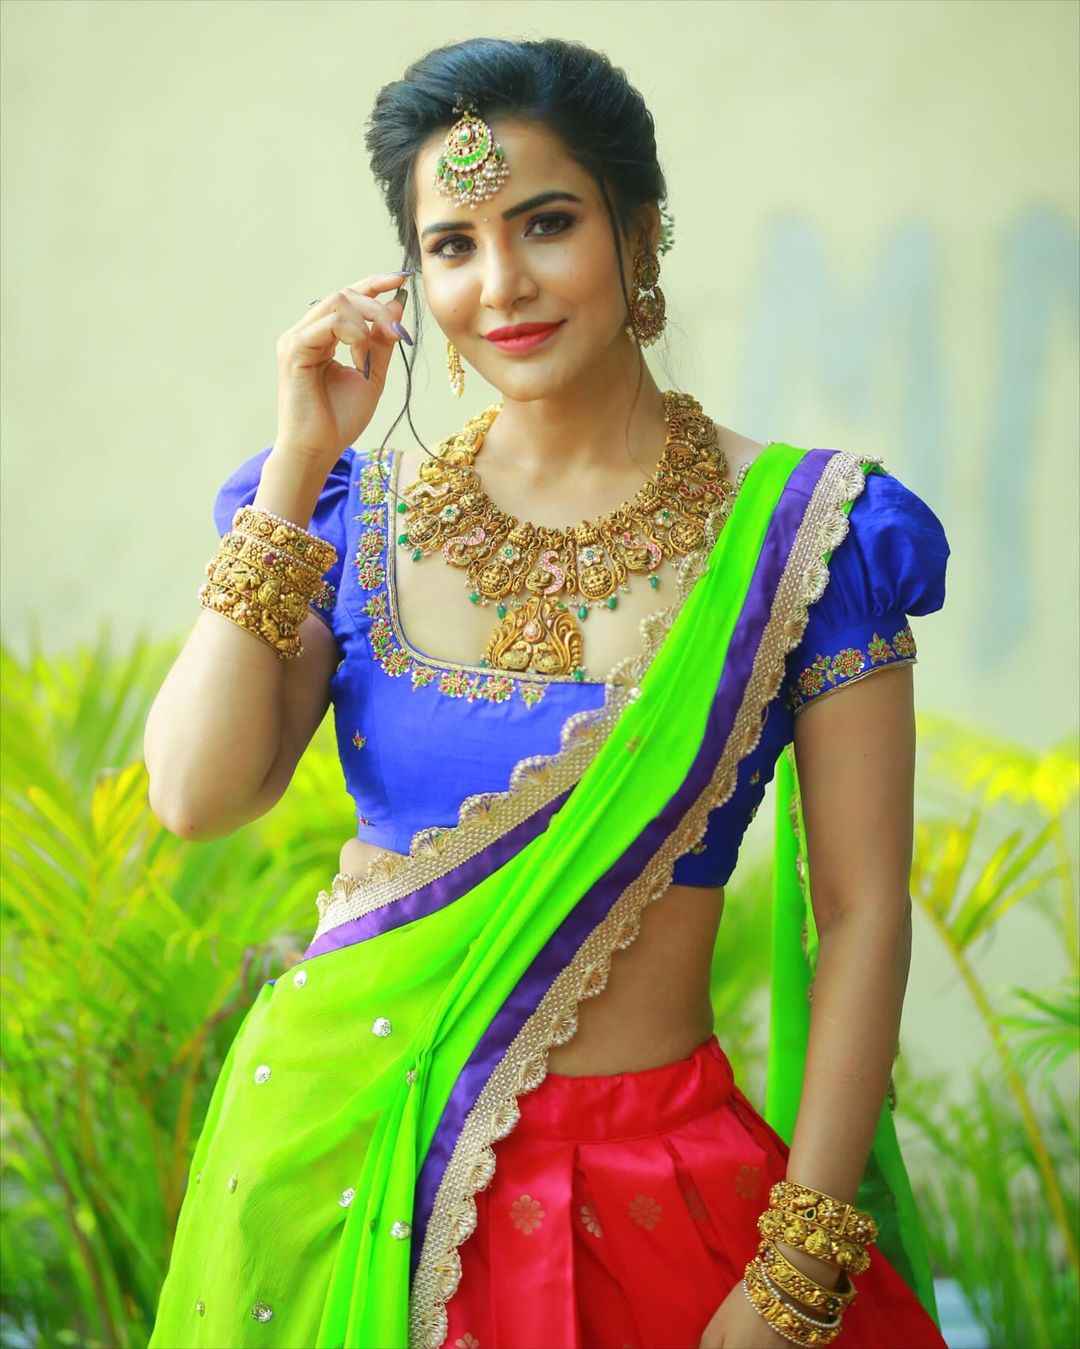 Actress ashu reddy hot poses in off saree-Actressashu, Ashu Reddy Photos,Spicy Hot Pics,Images,High Resolution WallPapers Download